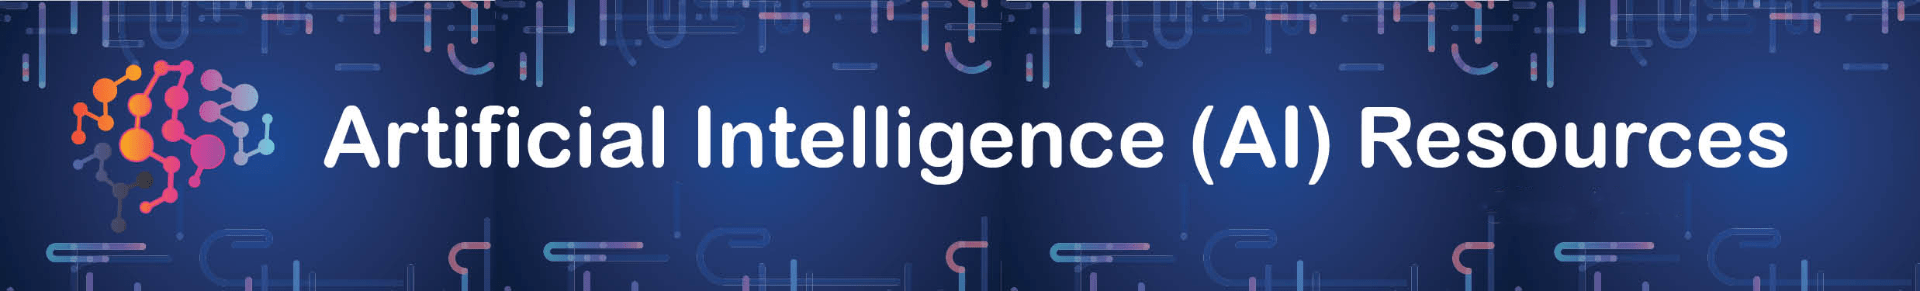 Artificial Intelligence Resources Banner